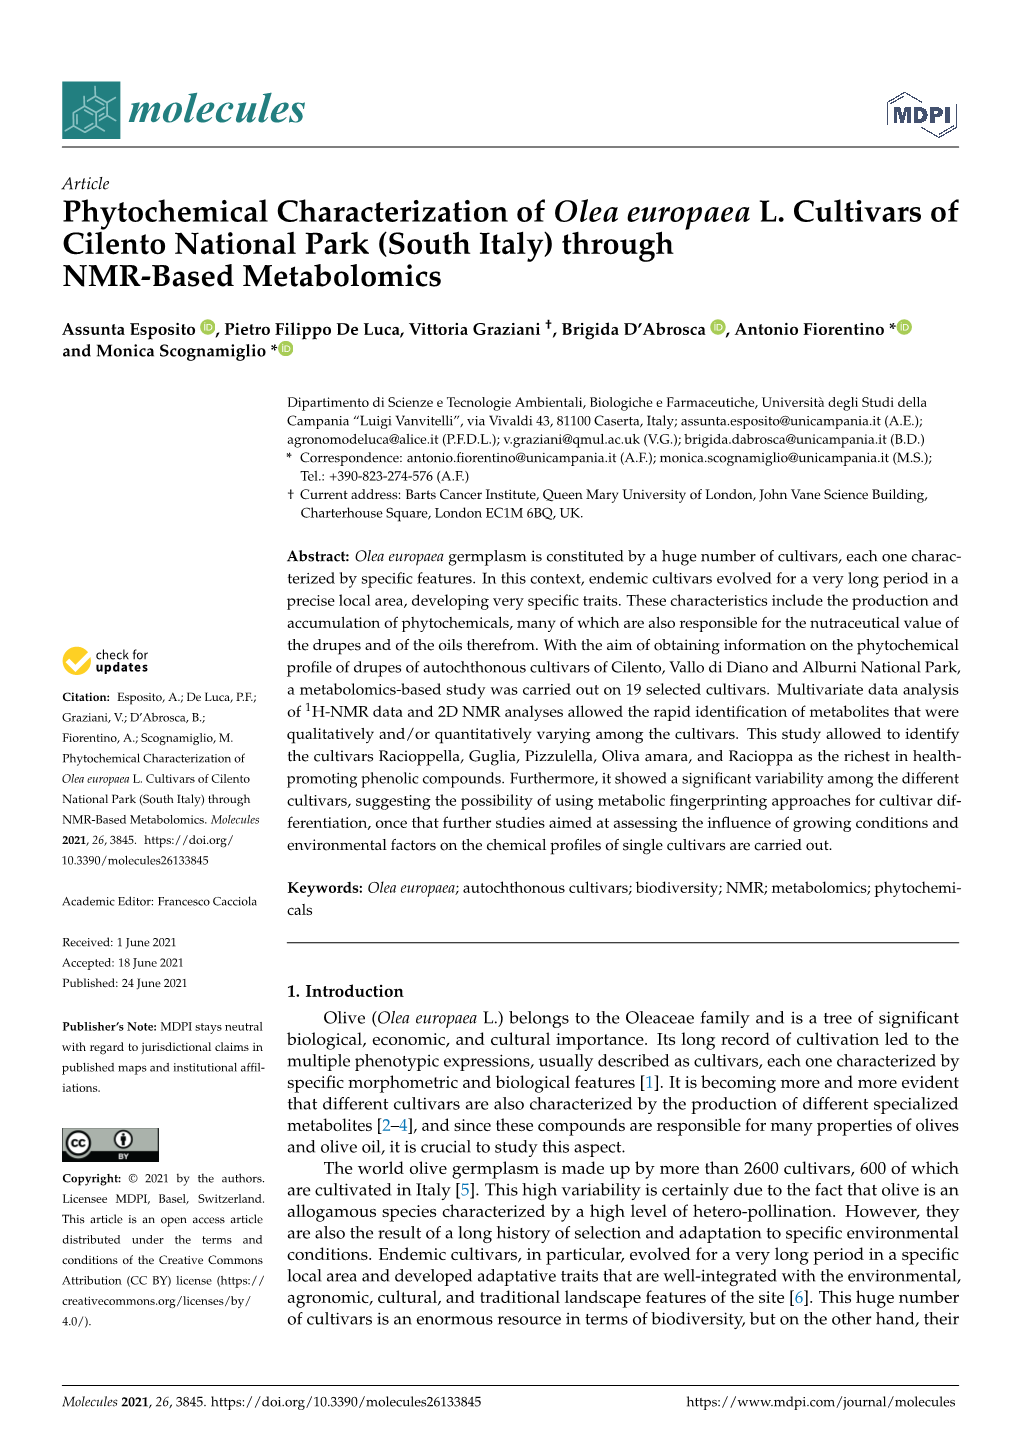 Phytochemical Characterization of Olea Europaea L. Cultivars of Cilento National Park (South Italy) Through NMR-Based Metabolomics